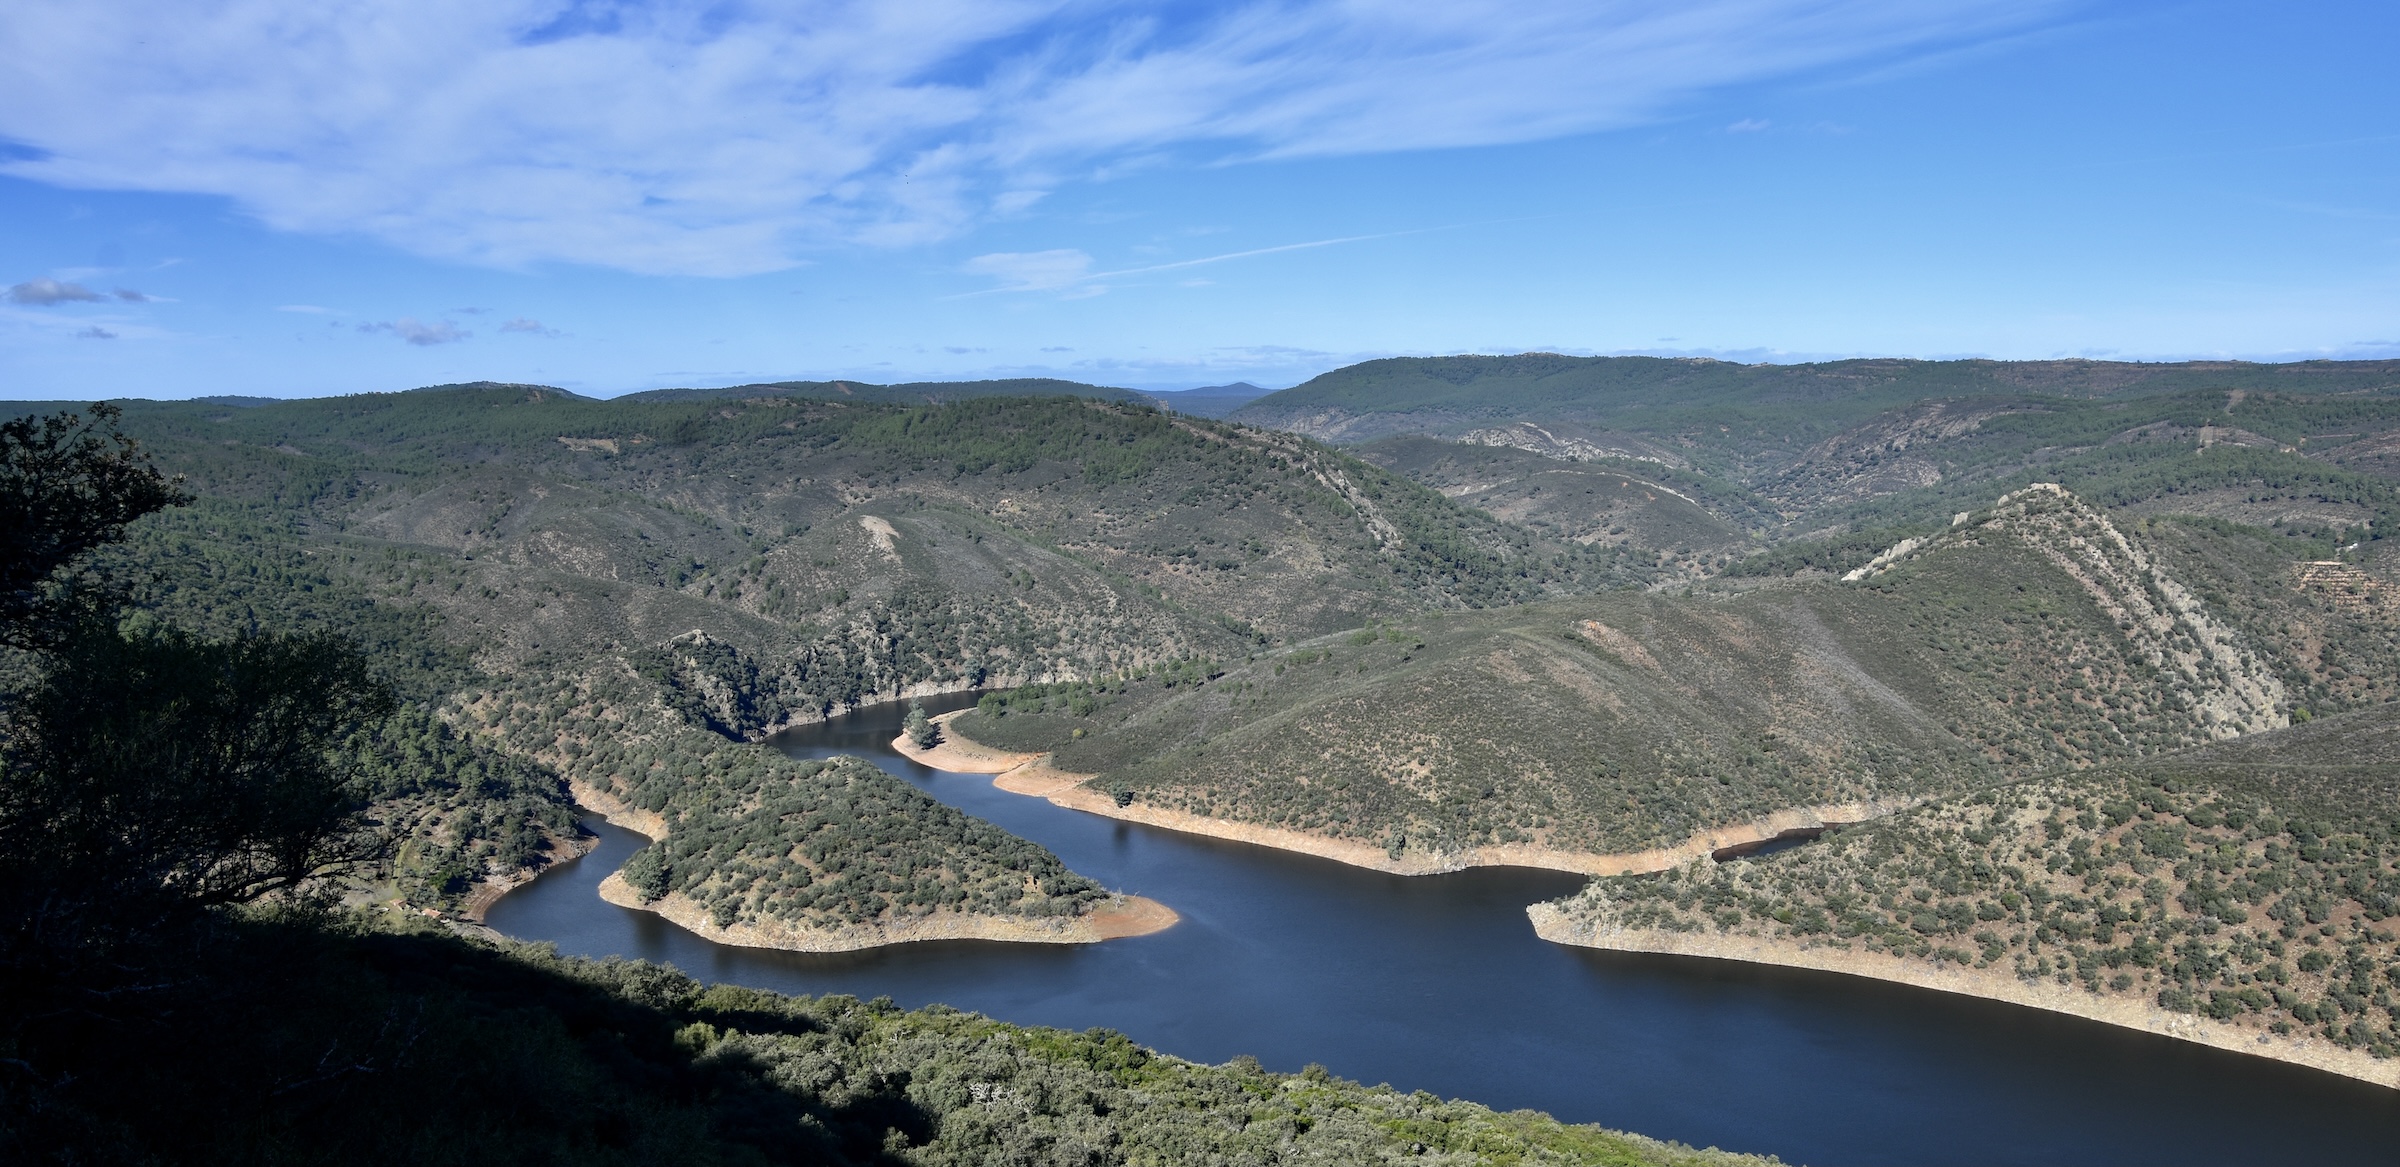 Confluence of the Tagus and Tietar Rivers, Monfrague NP